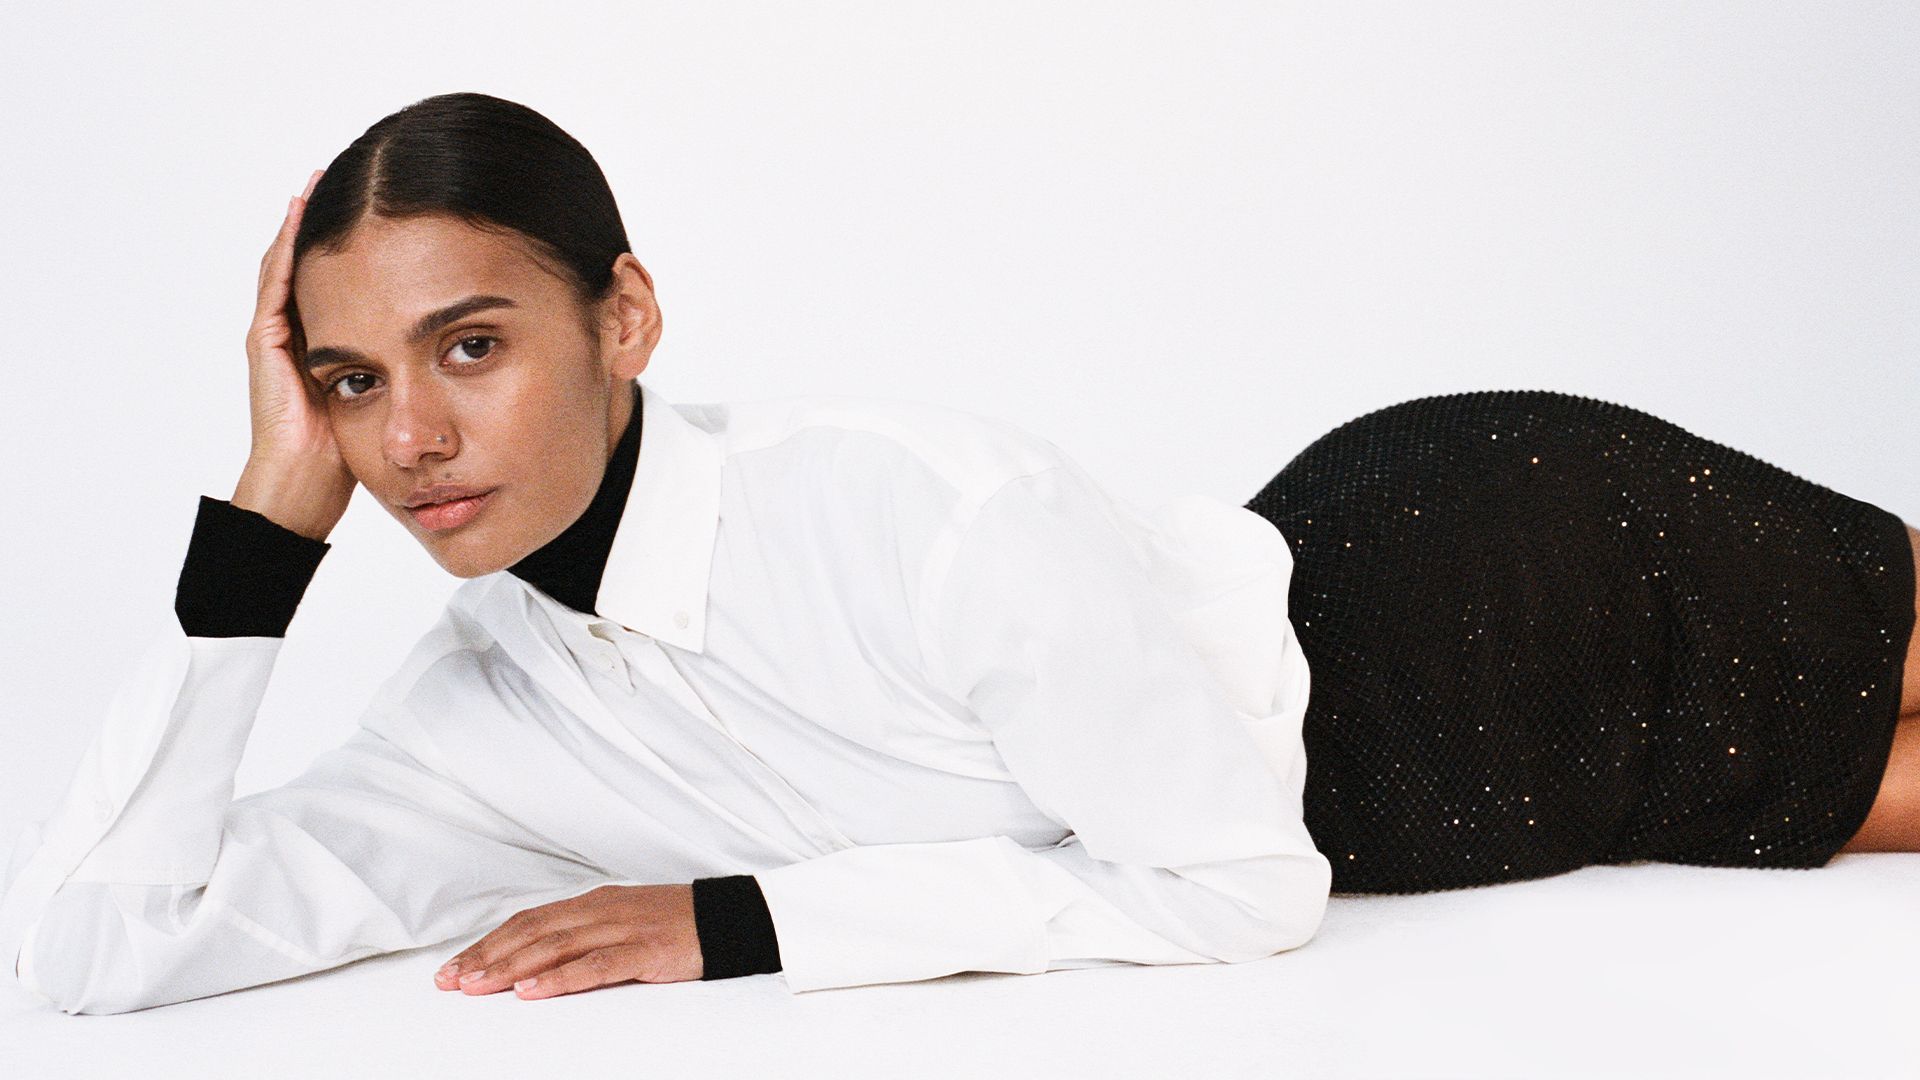 Madeleine Madden lying down wearing a white cotton shirt and sparkly black mini skirt